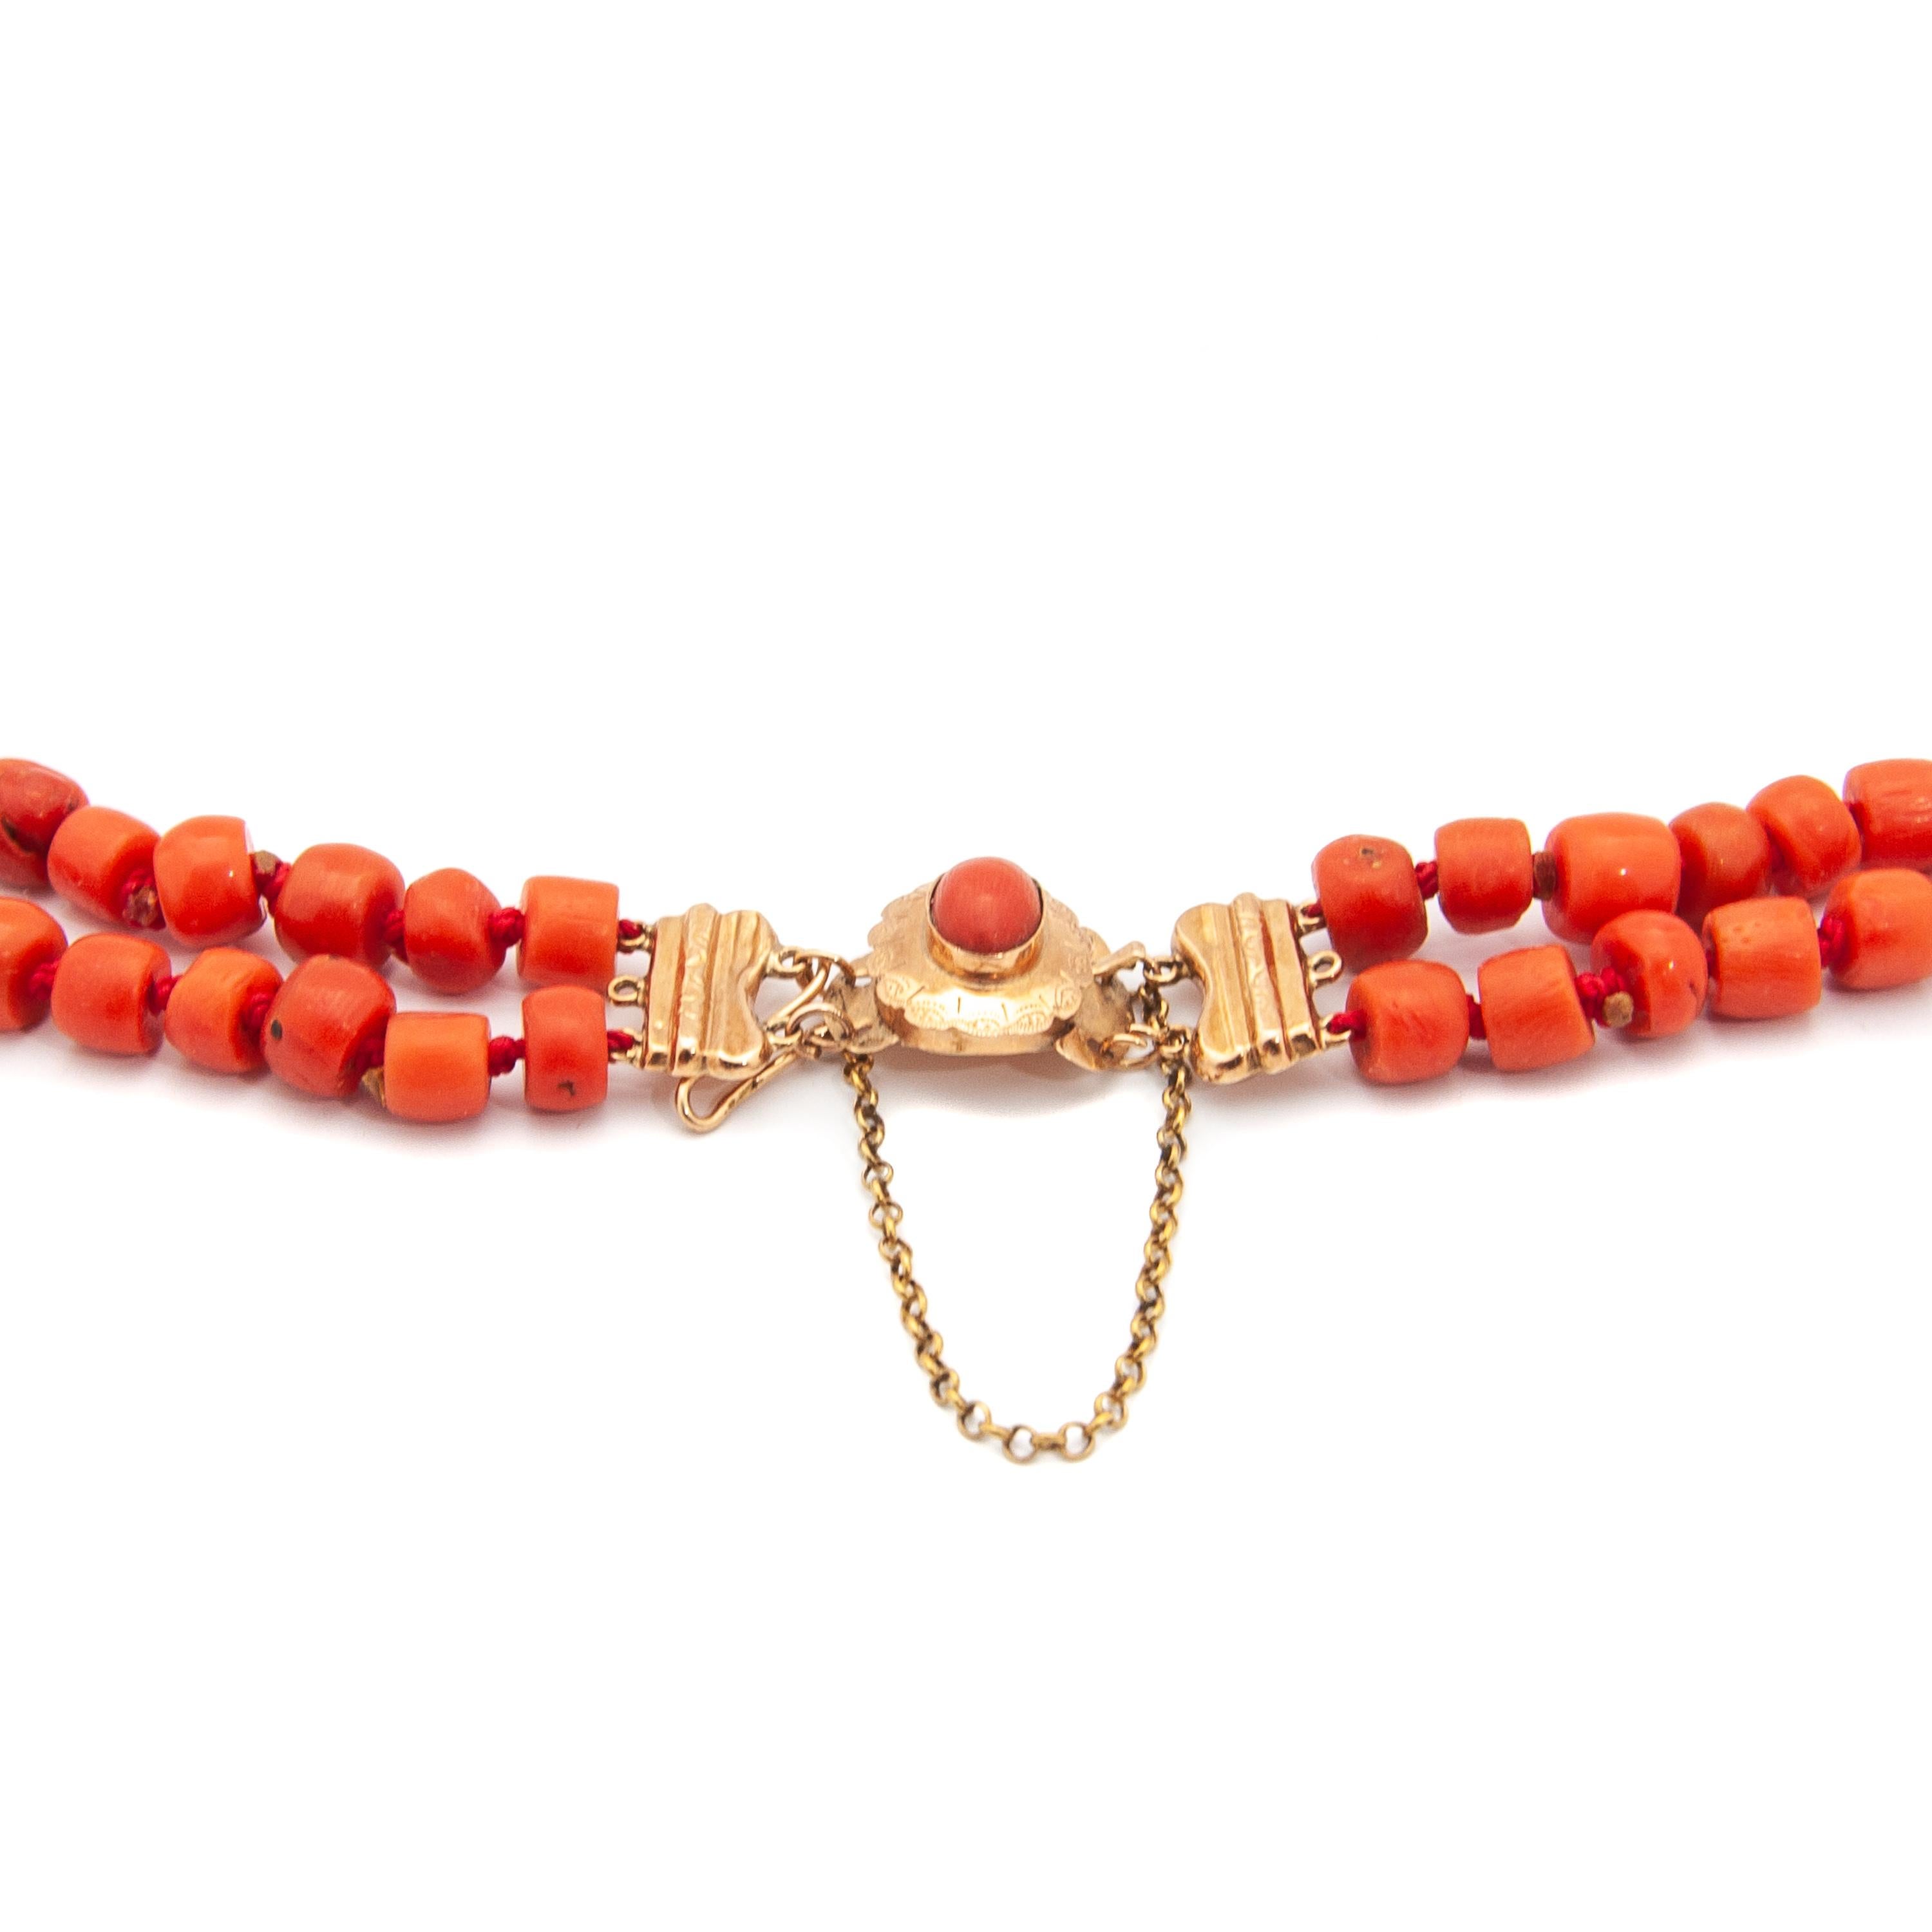  Red Coral 14 Karat Yellow Gold Multi-Strand Beaded Necklace 7